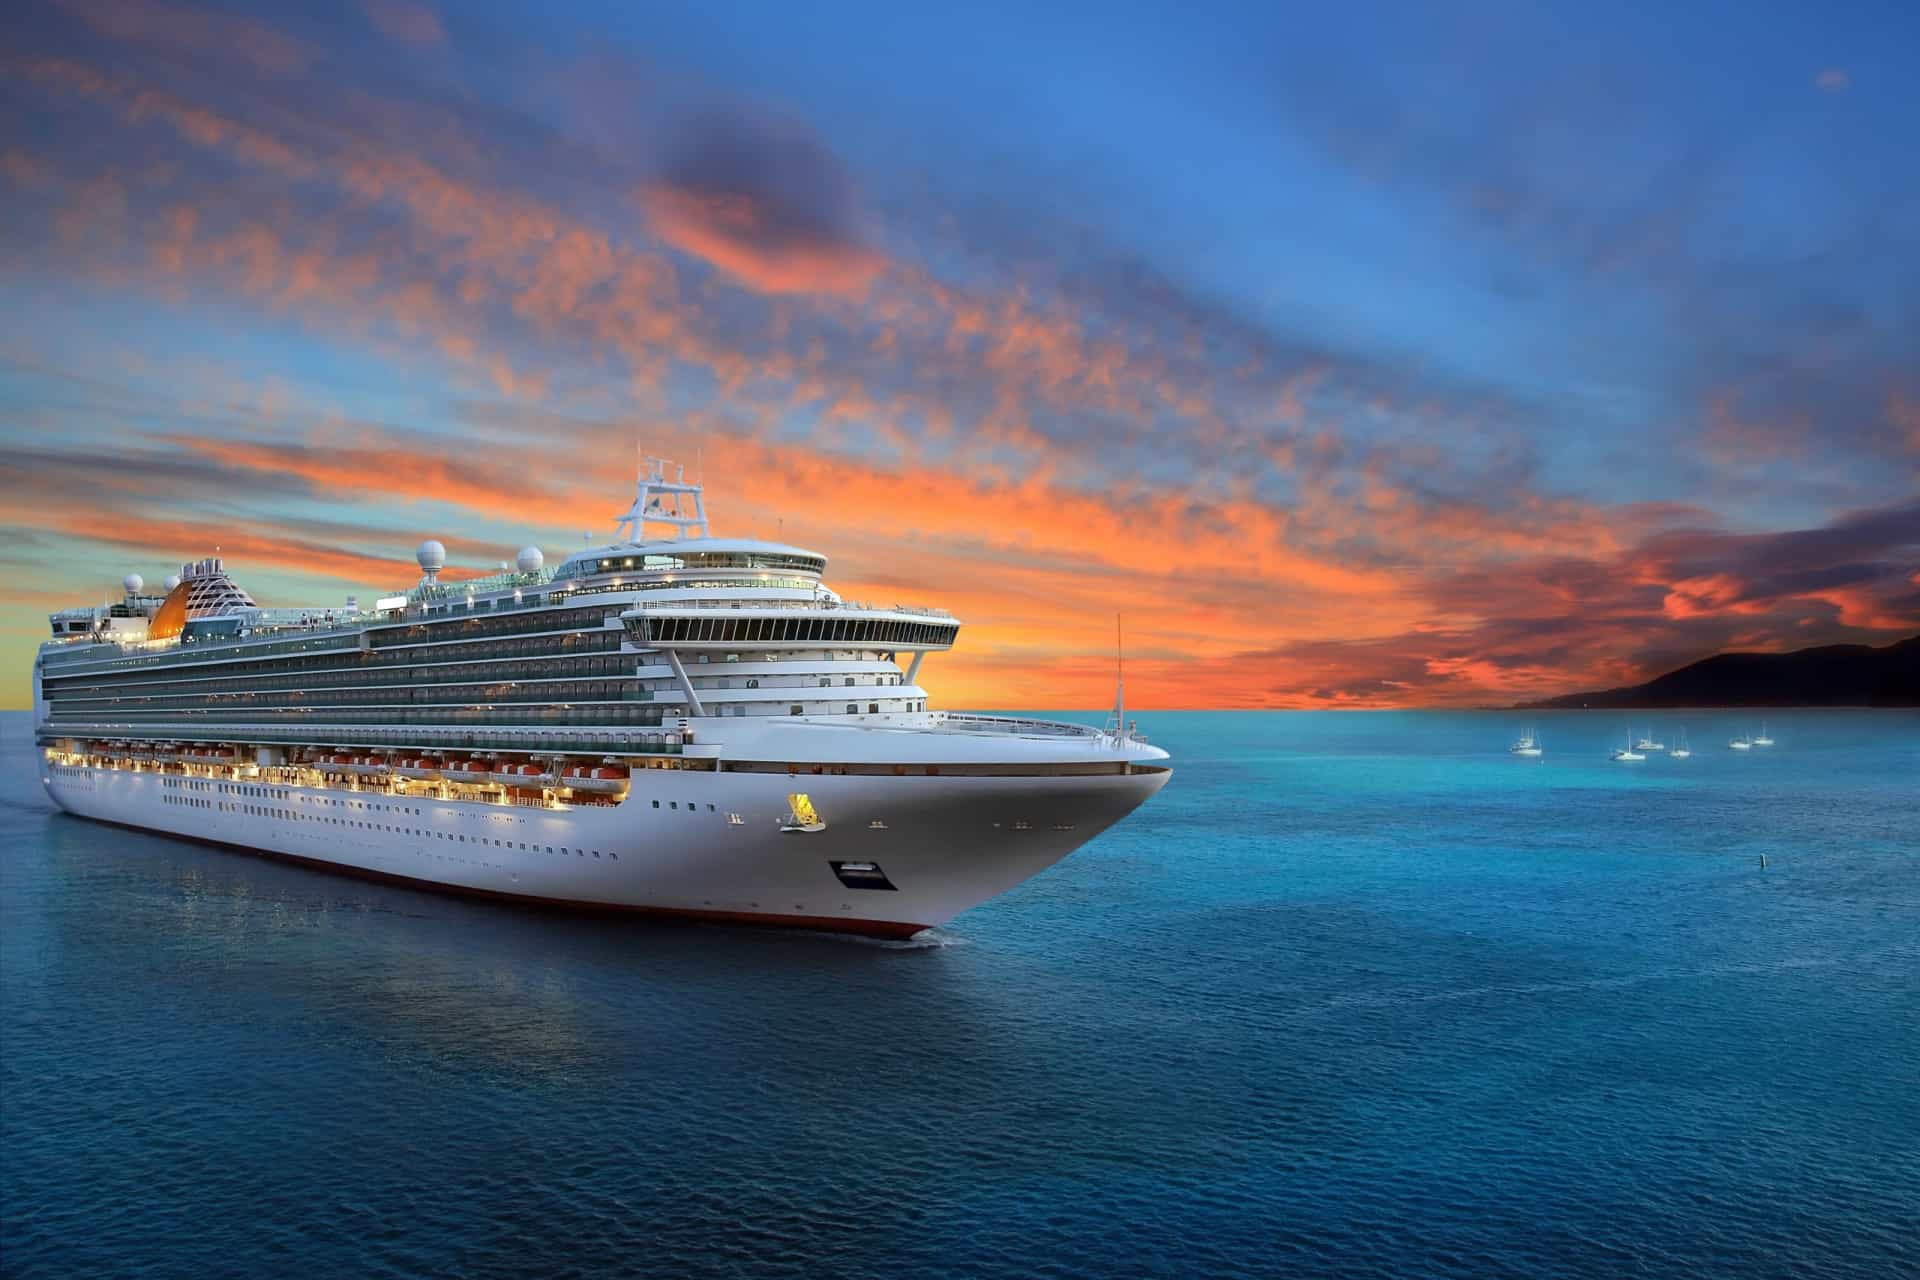 <p>Have you ever dreamt of leaving everything behind to sail the seas, but wanted the comfort of a vacation stay at the same time? Well, Life at Sea Cruises is making that dream happen as it is launching a three-year, 130,000-mile cruise for US$30,000 per person per year. The MV Gemini sets sail from Istanbul in November 2023 and promises to stop off at 375 ports around the world—208 of which will be overnight stops—visiting 135 countries and all seven continents.  Four hundred cabins are available for this cozy three-year voyage with just you and 1,073 other passengers. While it seems idyllic, there are a whole host of <a href="https://www.starsinsider.com/travel/369312/should-you-still-vacation-on-cruise-ships" rel="noopener">concerns</a> that come from this new proposed mode of living, though it's incredible that it may be a more affordable lifestyle than what some people already have. </p> <p>A cruise is one of the most popular vacation options in the world. Passengers board what is effectively a huge floating hotel featuring a wealth of fabulous leisure facilities and amenities, and sail to some of the most desirable global <a href="https://www.starsinsider.com/travel/248293/travel-destinations-you-should-make-an-effort-to-see" rel="noopener">destinations</a>. But how did this industry—worth a cool US$23.8 billion in 2021, according to Cruise Market Watch—evolve?</p> <p>Click through and embark on a voyage through the history of the cruise ship holiday.</p><p>You may also like:<a href="https://www.starsinsider.com/n/204088?utm_source=msn.com&utm_medium=display&utm_campaign=referral_description&utm_content=597926en-za"> Horror movies that originally had much more sinister endings</a></p>